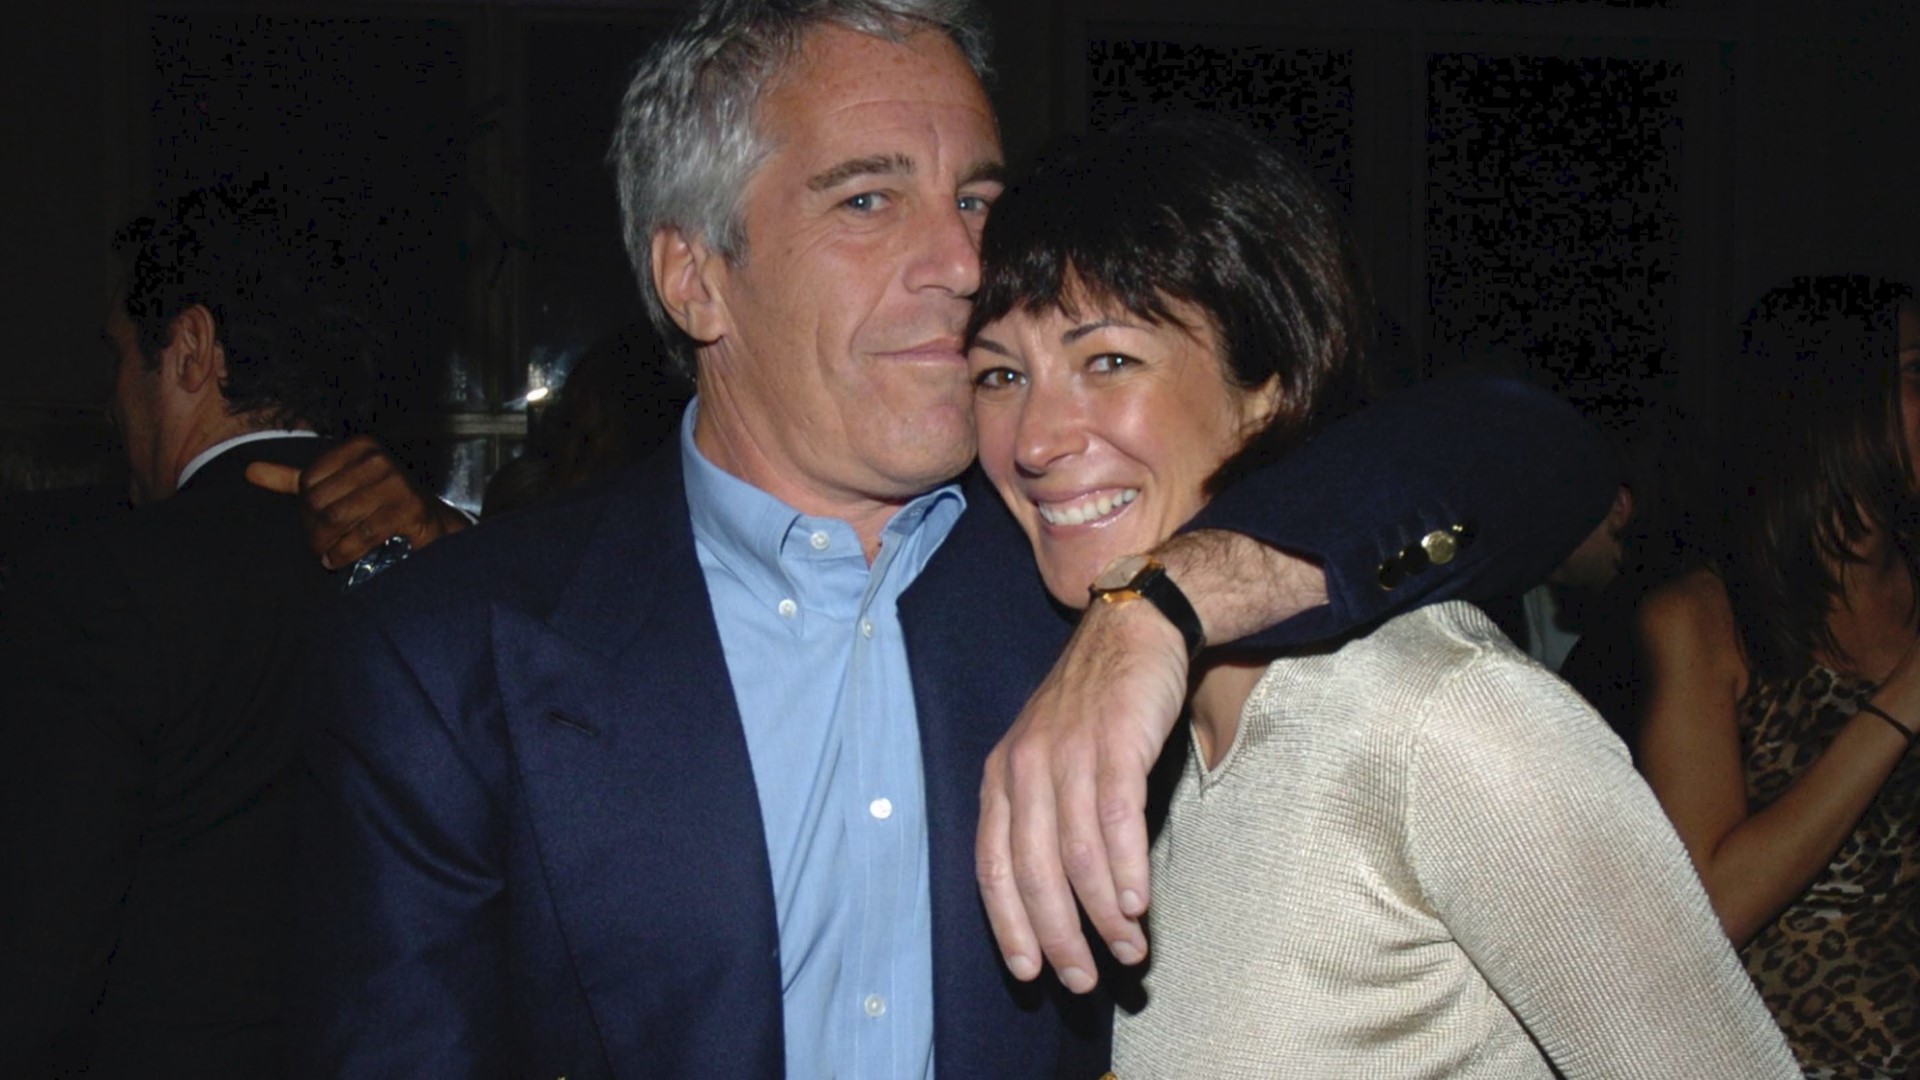 Ghislaine Maxwell has reportedly been arrested by the FBI on charges related to Jeffrey Epstein, News 4 New York reports.